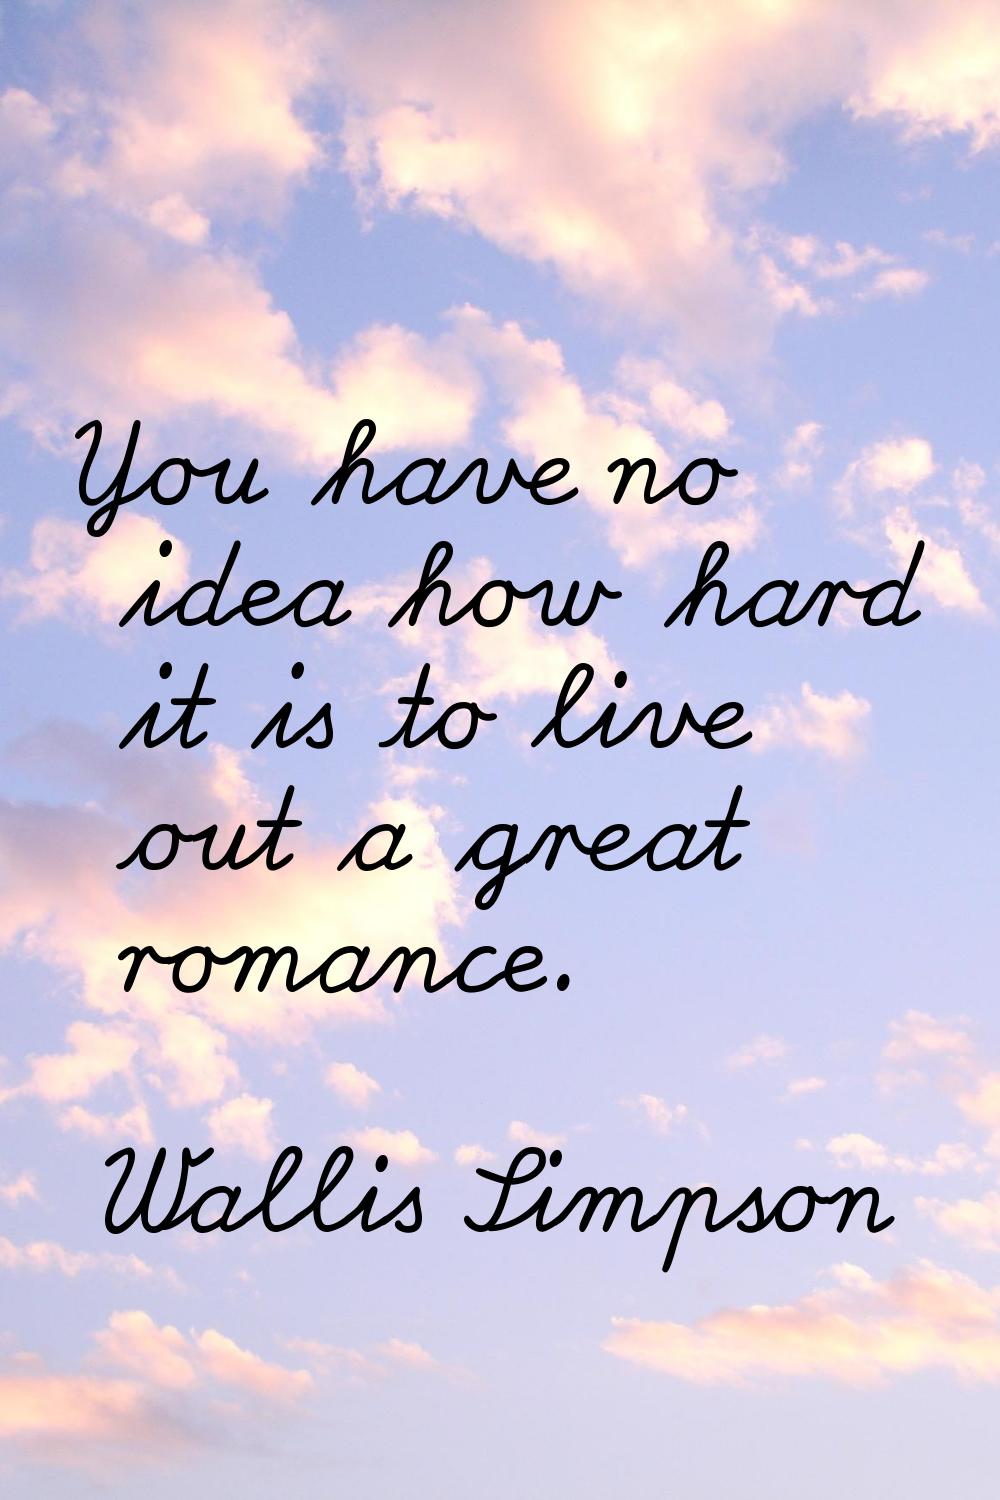 You have no idea how hard it is to live out a great romance.